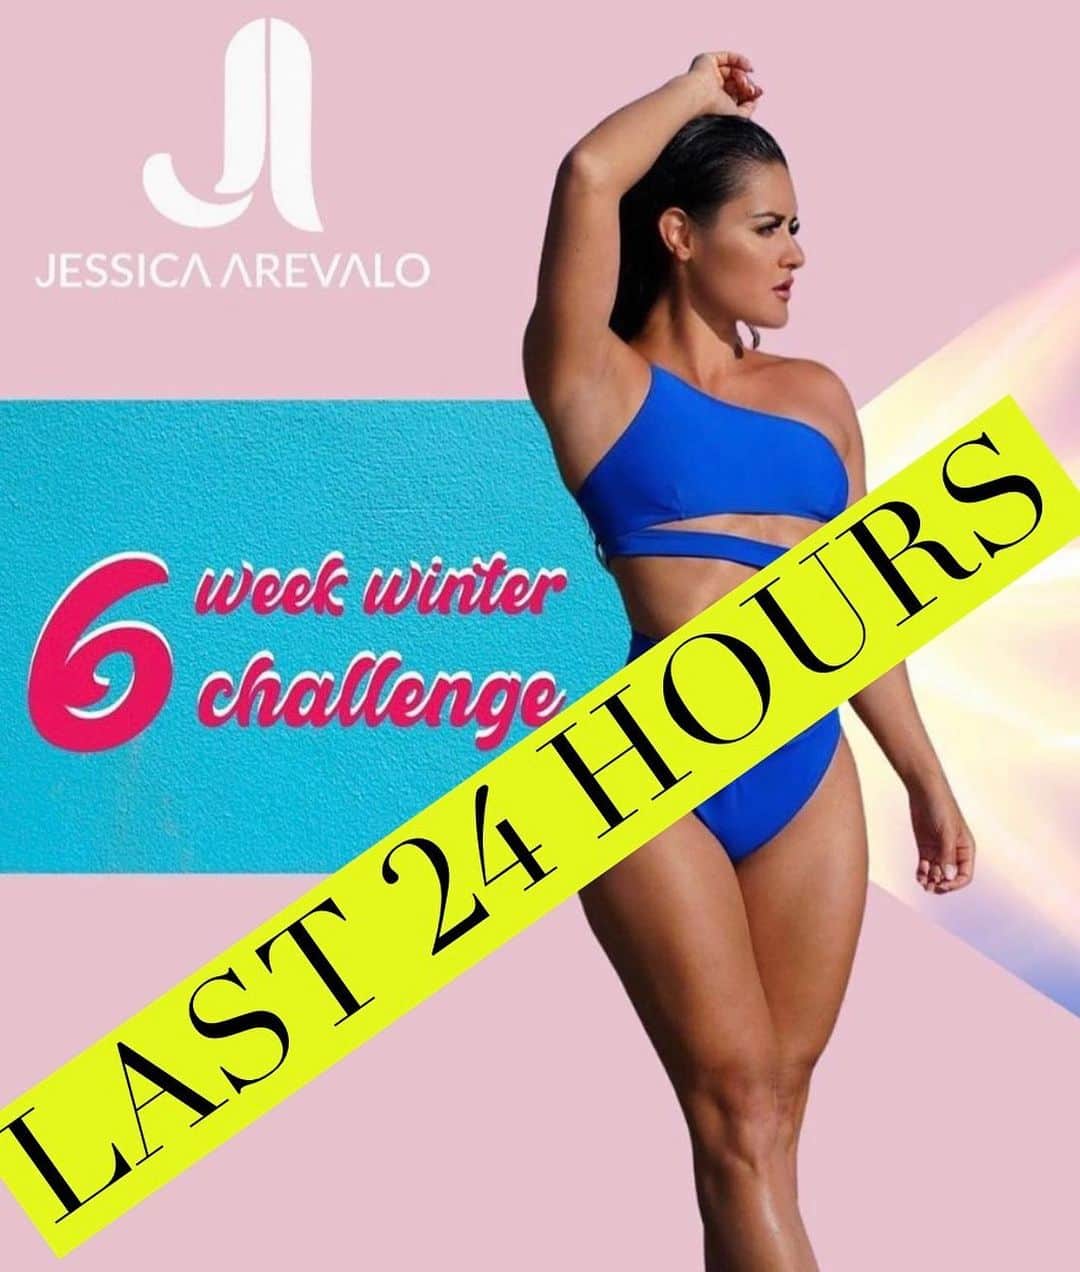 Jessica Arevaloのインスタグラム：「FINAL CHANCE TO SIGN UP! LAST 24 HOURS DON’T MISS OUT! 😍  💥IF YOU ARE LOOKING TO TONE UP, LOSE FAT OR LEARN MY WAYS THIS CHALLENGE IS FOR YOU!💥 - Open enrollment is through Dec 13 & the challenge starts Dec 14! DON’T WAIT!🙌🏼 - 🔺My 6 Week Winter is challenge is just $99!!!  🔺This program includes: - 🔺BOTH GYM/HOME WORKOUTS  - 🔺Over $6k in cash prizes - 🔺One on One Coaching with me - 🔺Weekly Check ins - 🔺Workout Program +Macros/Meal Plans + Cardio Regimen  - 🔺Private Facebook Group and more! - 🔺WORLDWIDE ENTRY  - 🔺 FOR WOMEN & MEN  - CHECK OUT LINK IN BIO TO SIGN UP!👆🏼If you have any question please feel free to DM me directly!📩」